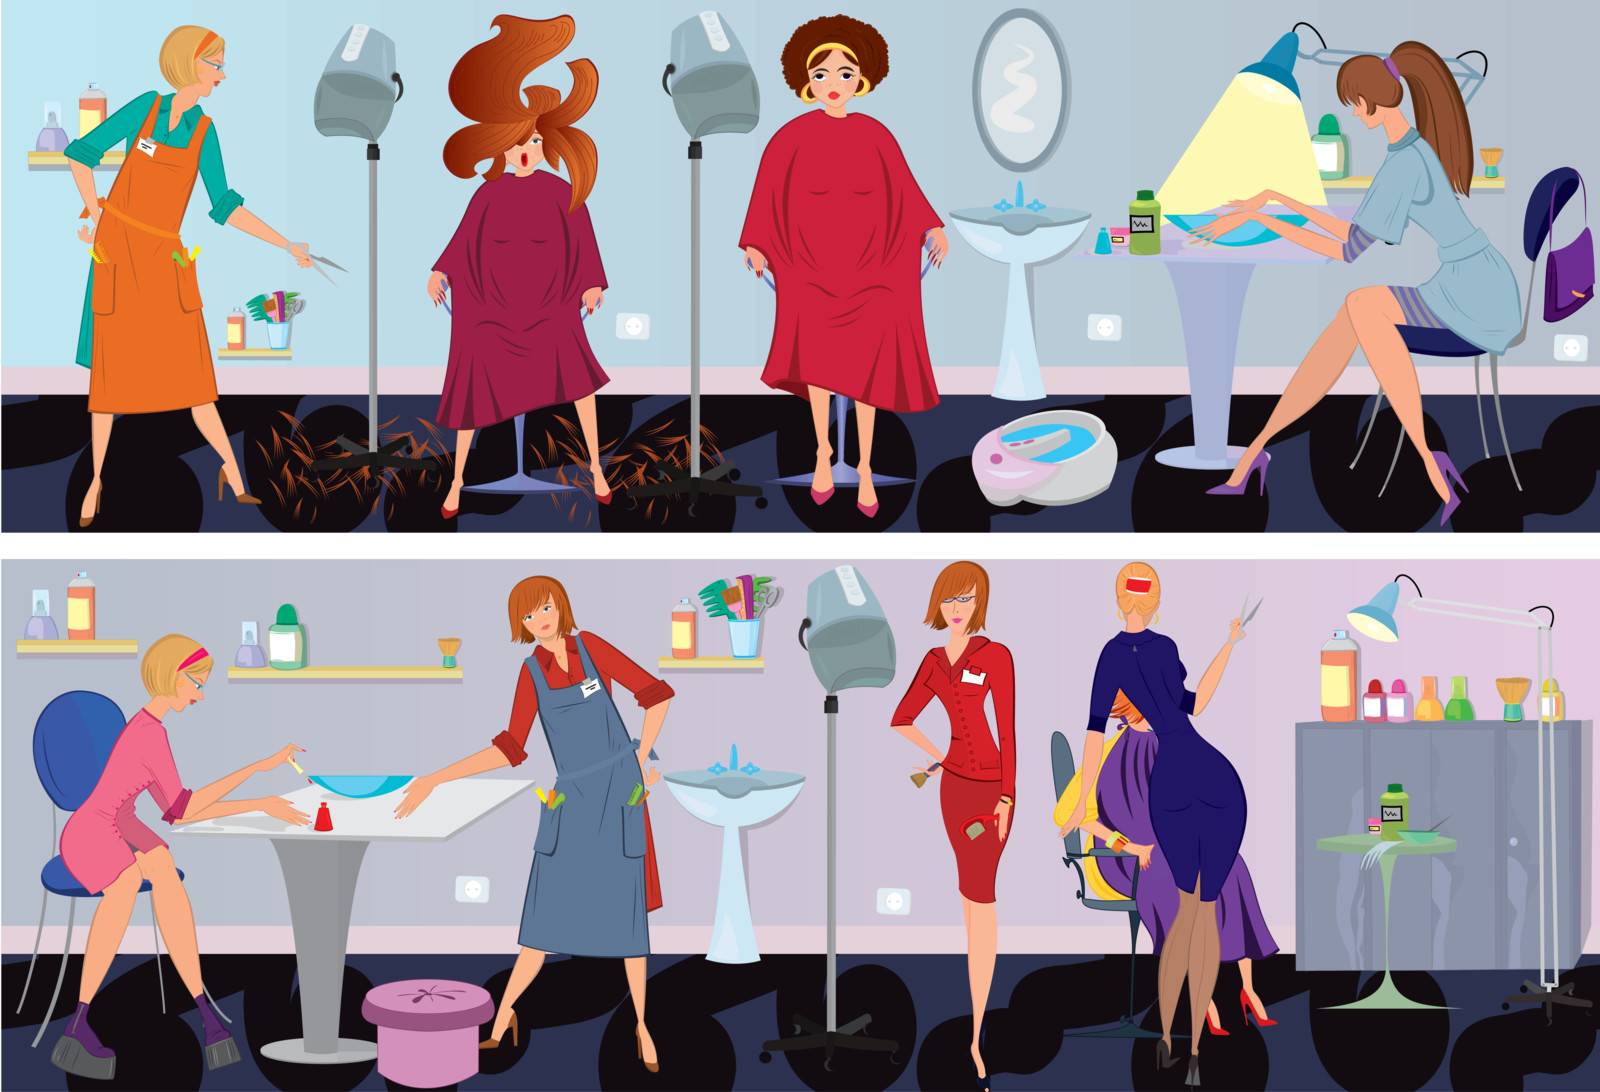 Beauty salon  workers and clients in different situations

